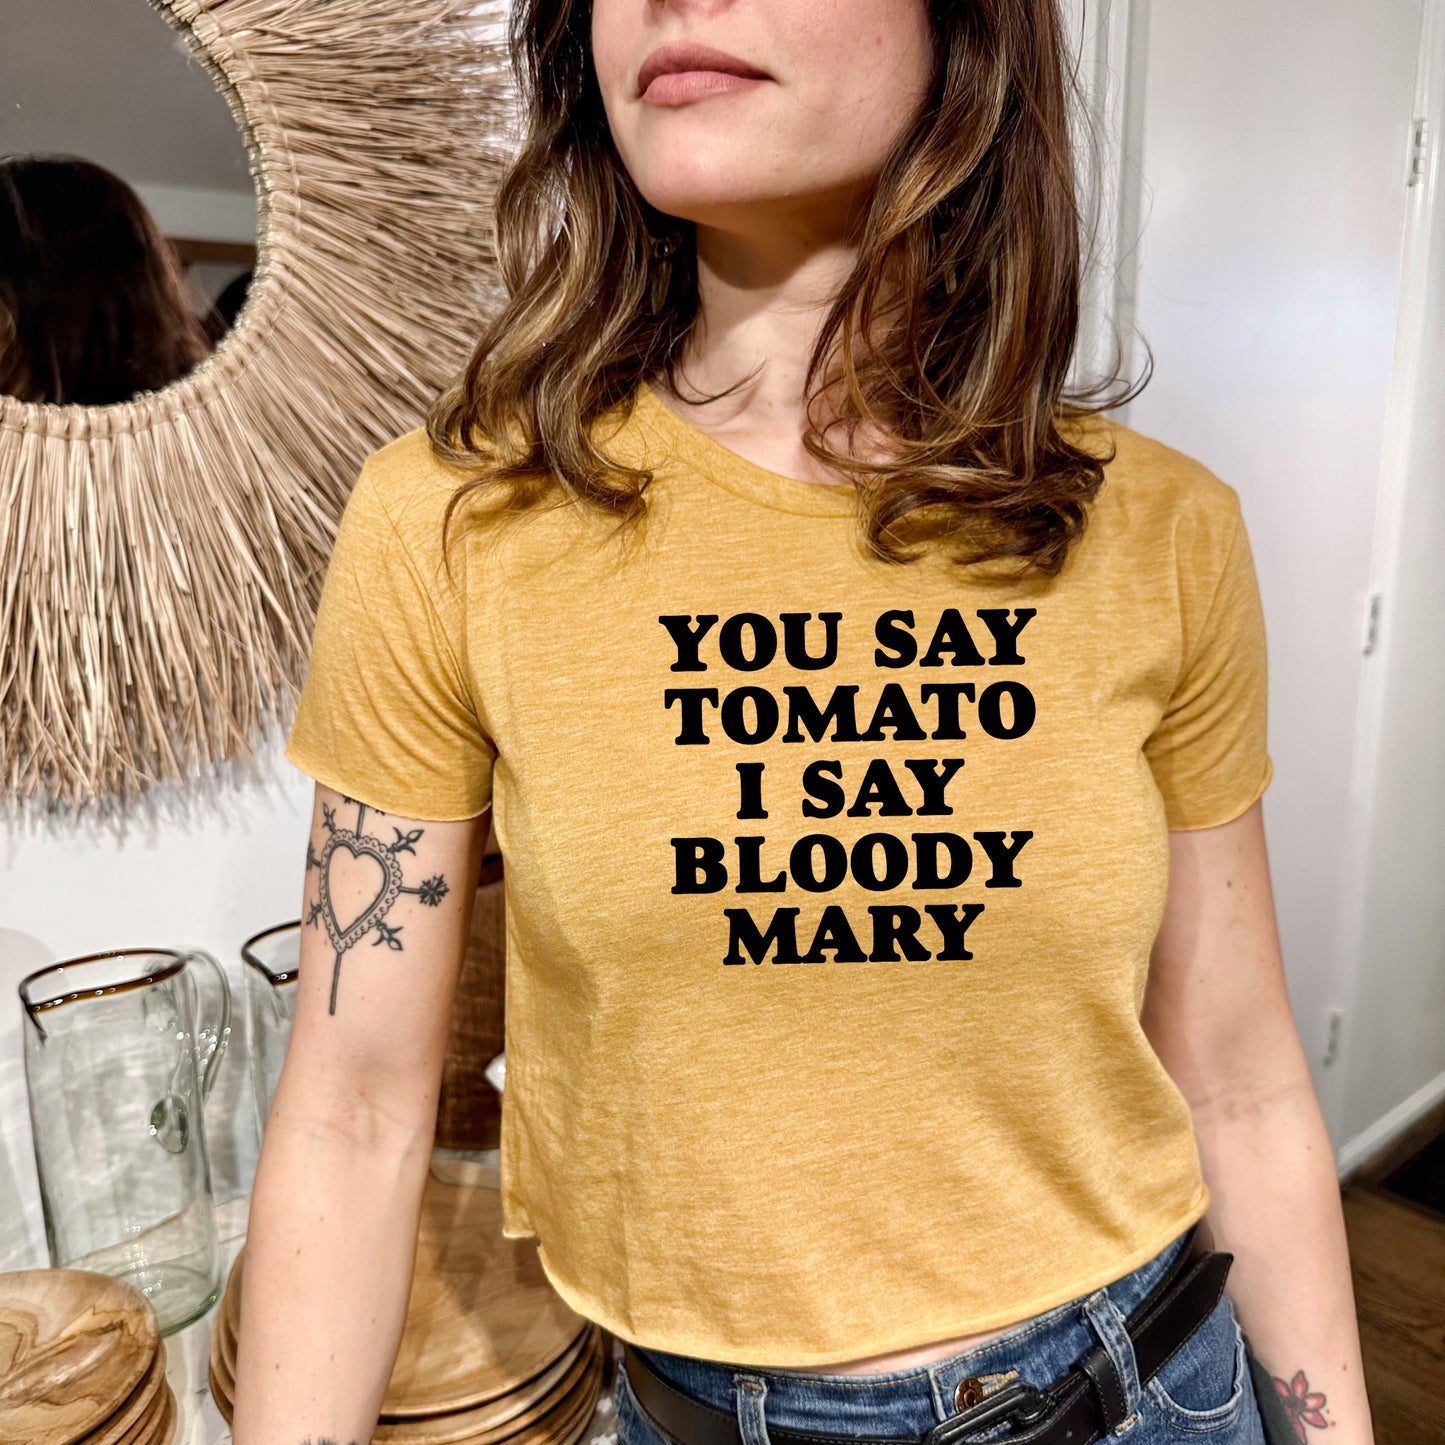 You Say Tomato I Say Bloody Mary - Women's Crop Tee - Heather Gray or Gold